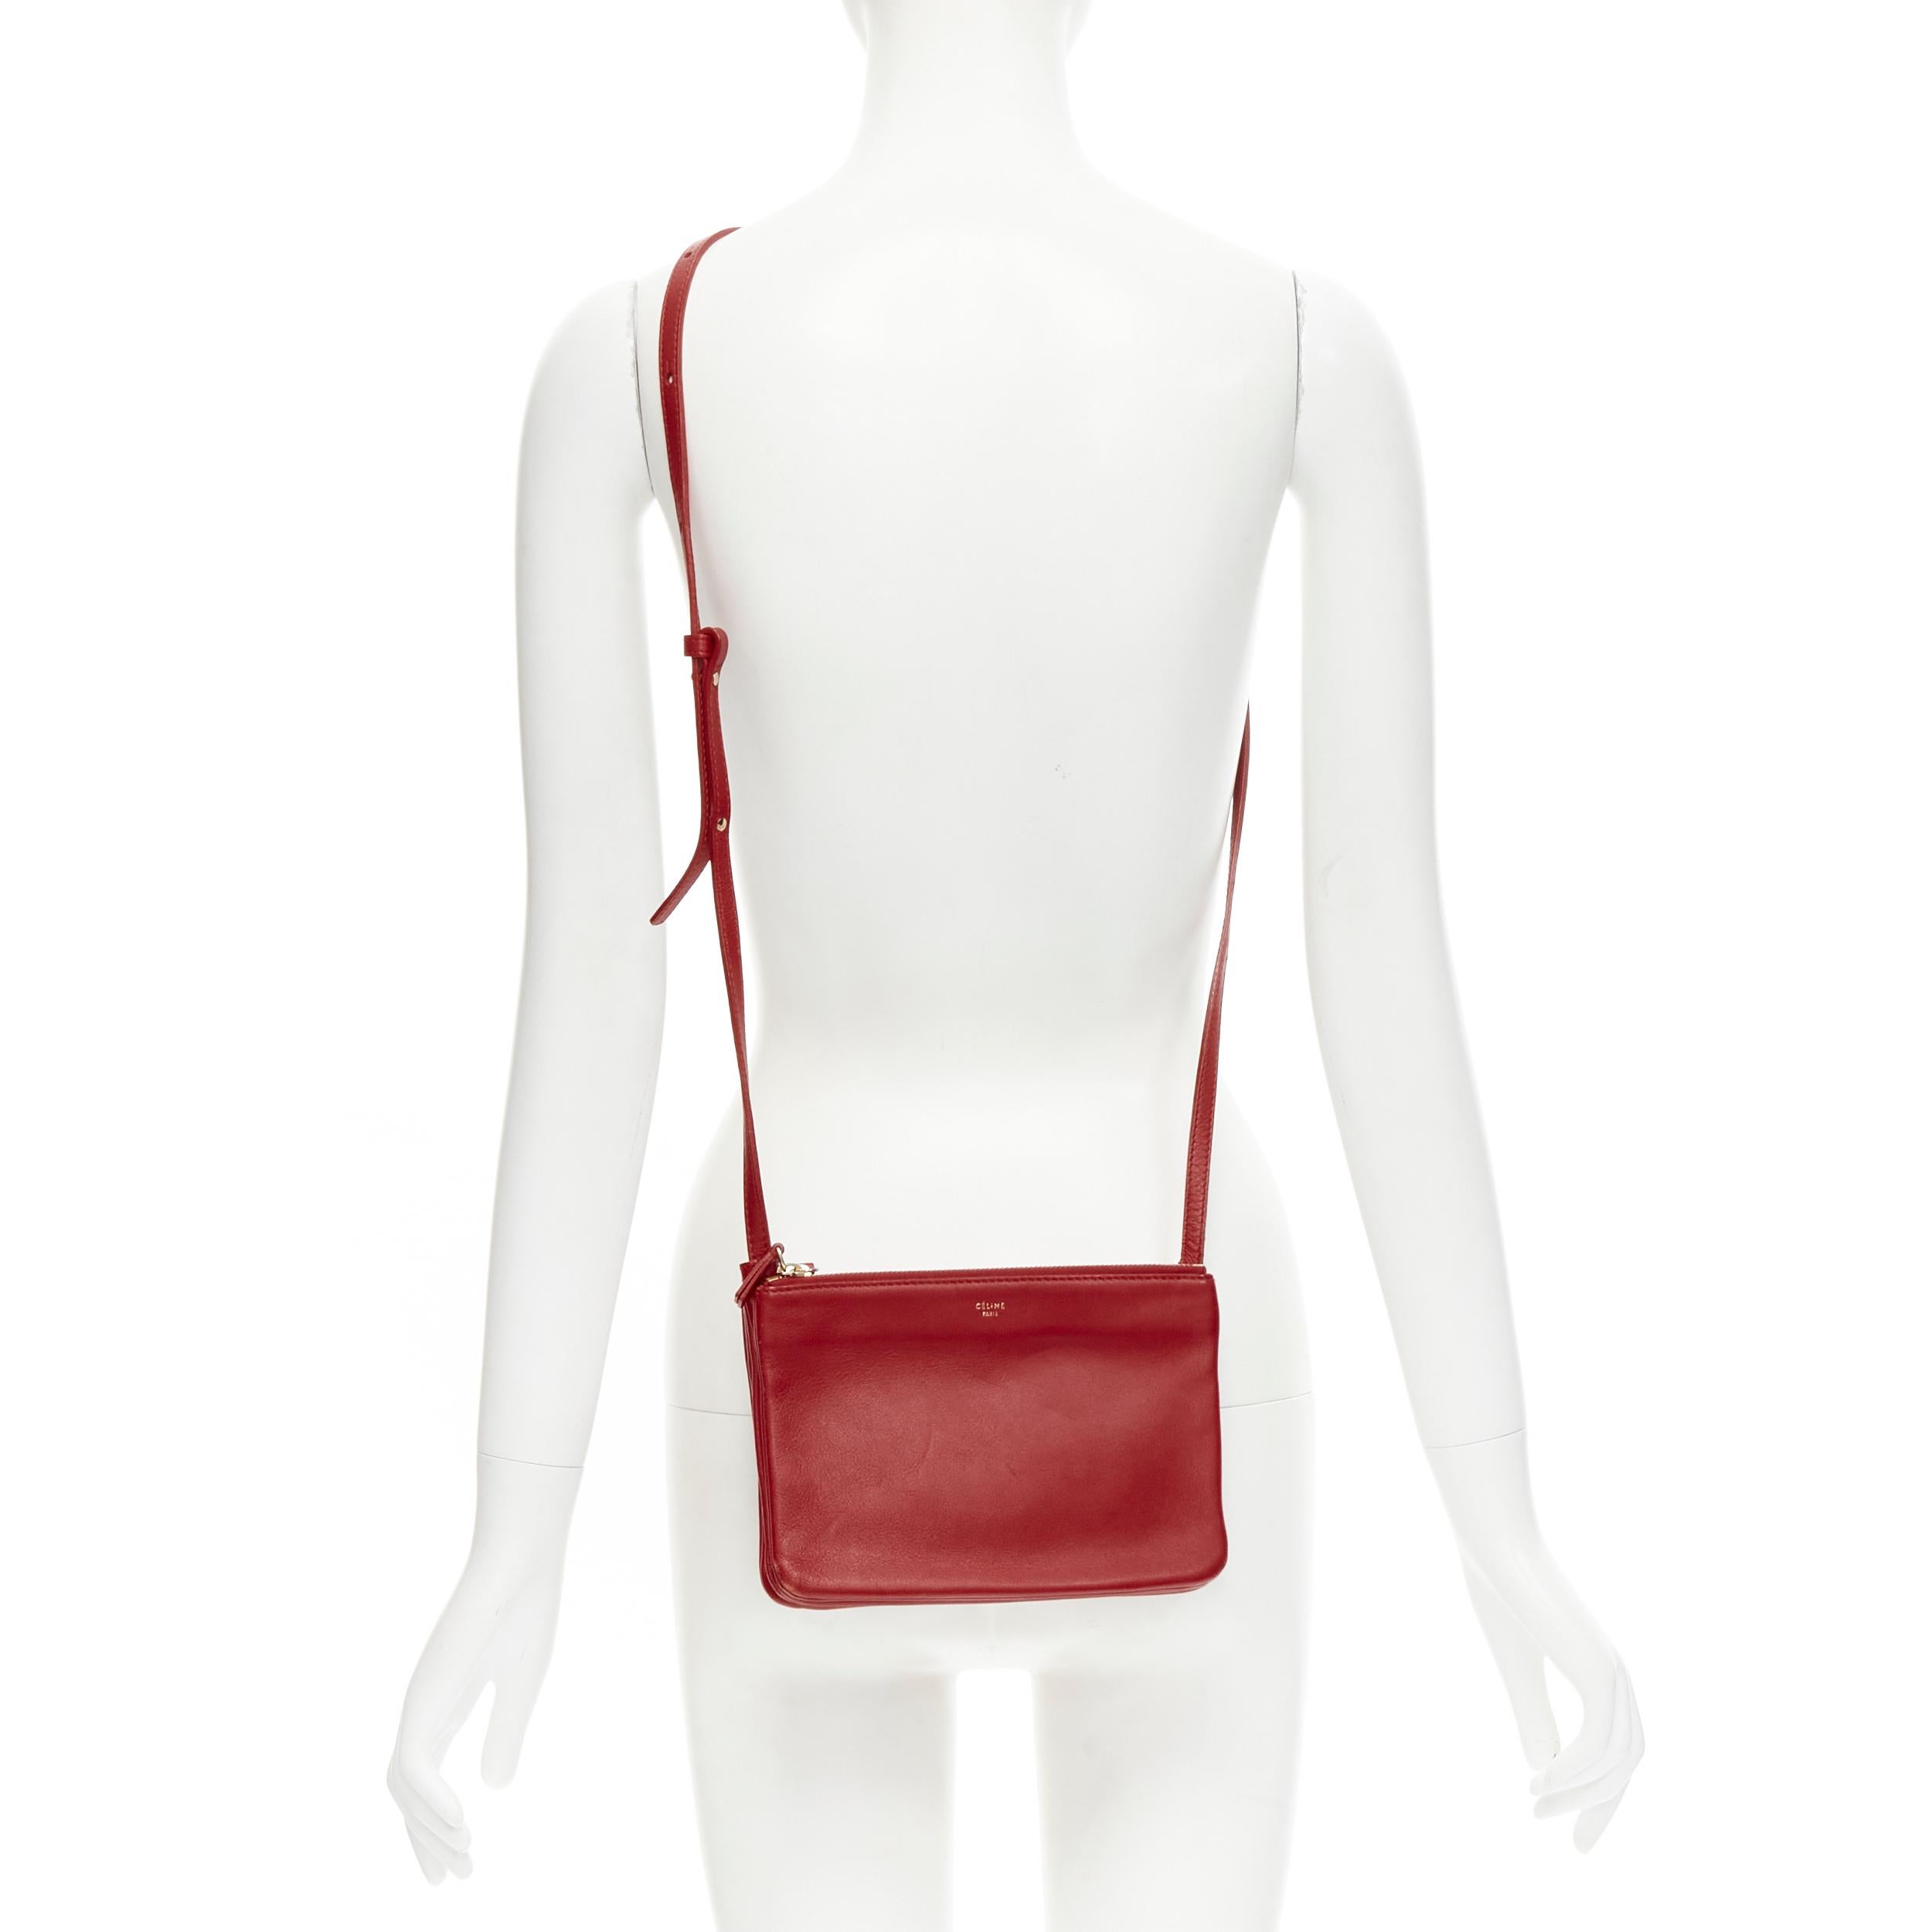 OLD CELINE Phoebe Philo red leather snap pocket Trio Pouch zip crossbody 
Reference: JNWG/A00020 
Brand: Celine 
Designer: Phoebe Philo 
Model: Trio 
Material: Leather 
Color: Red 
Pattern: Solid 
Closure: Zip 
Extra Detail: Trio pouch crossbody.